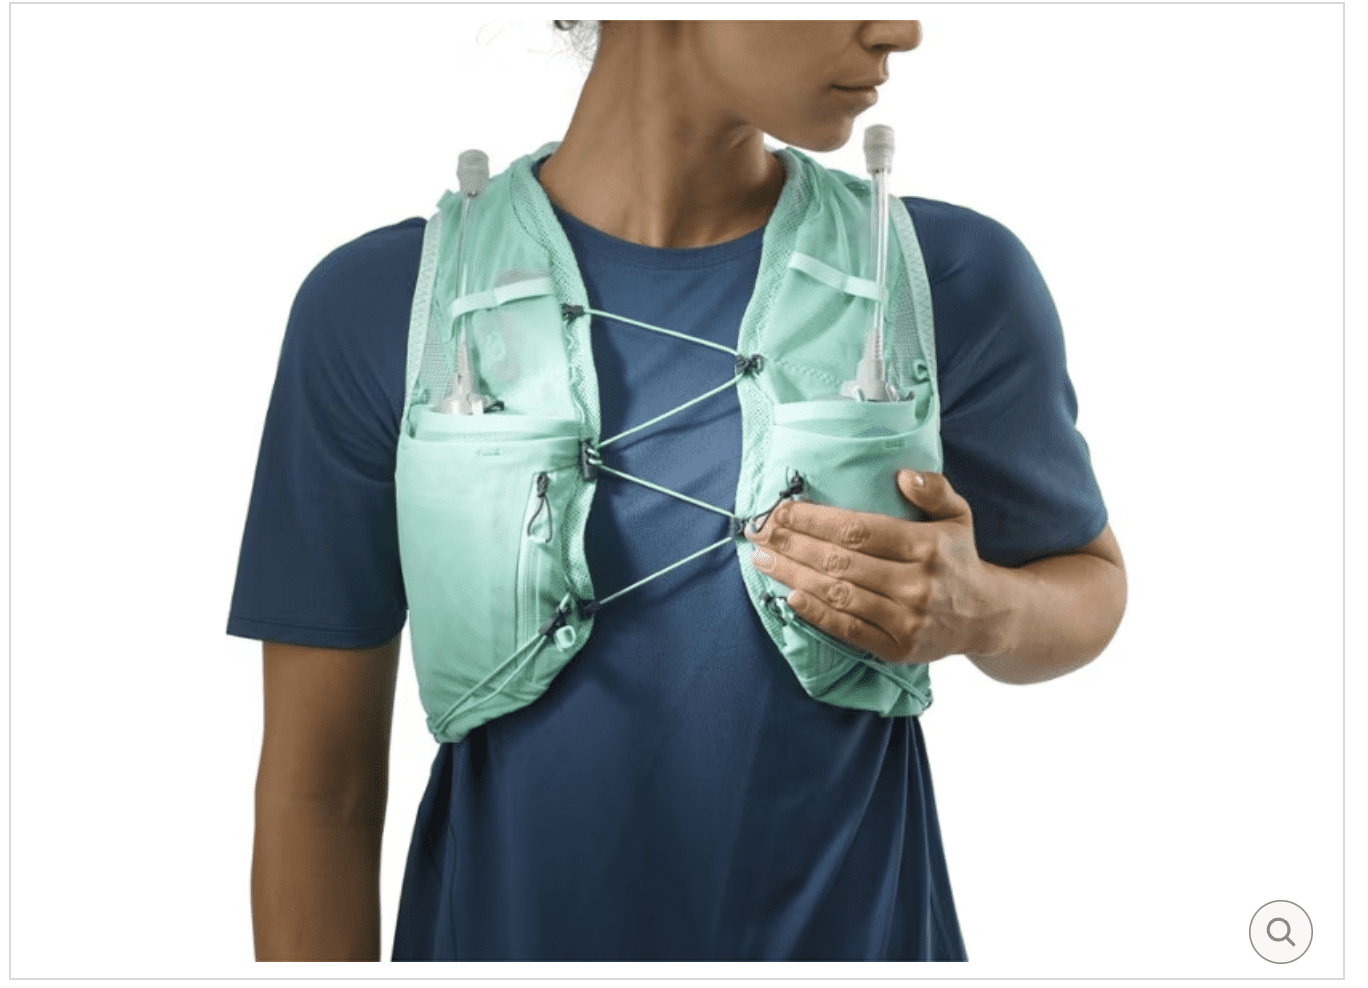 Weighted Vest - Hydration Vest